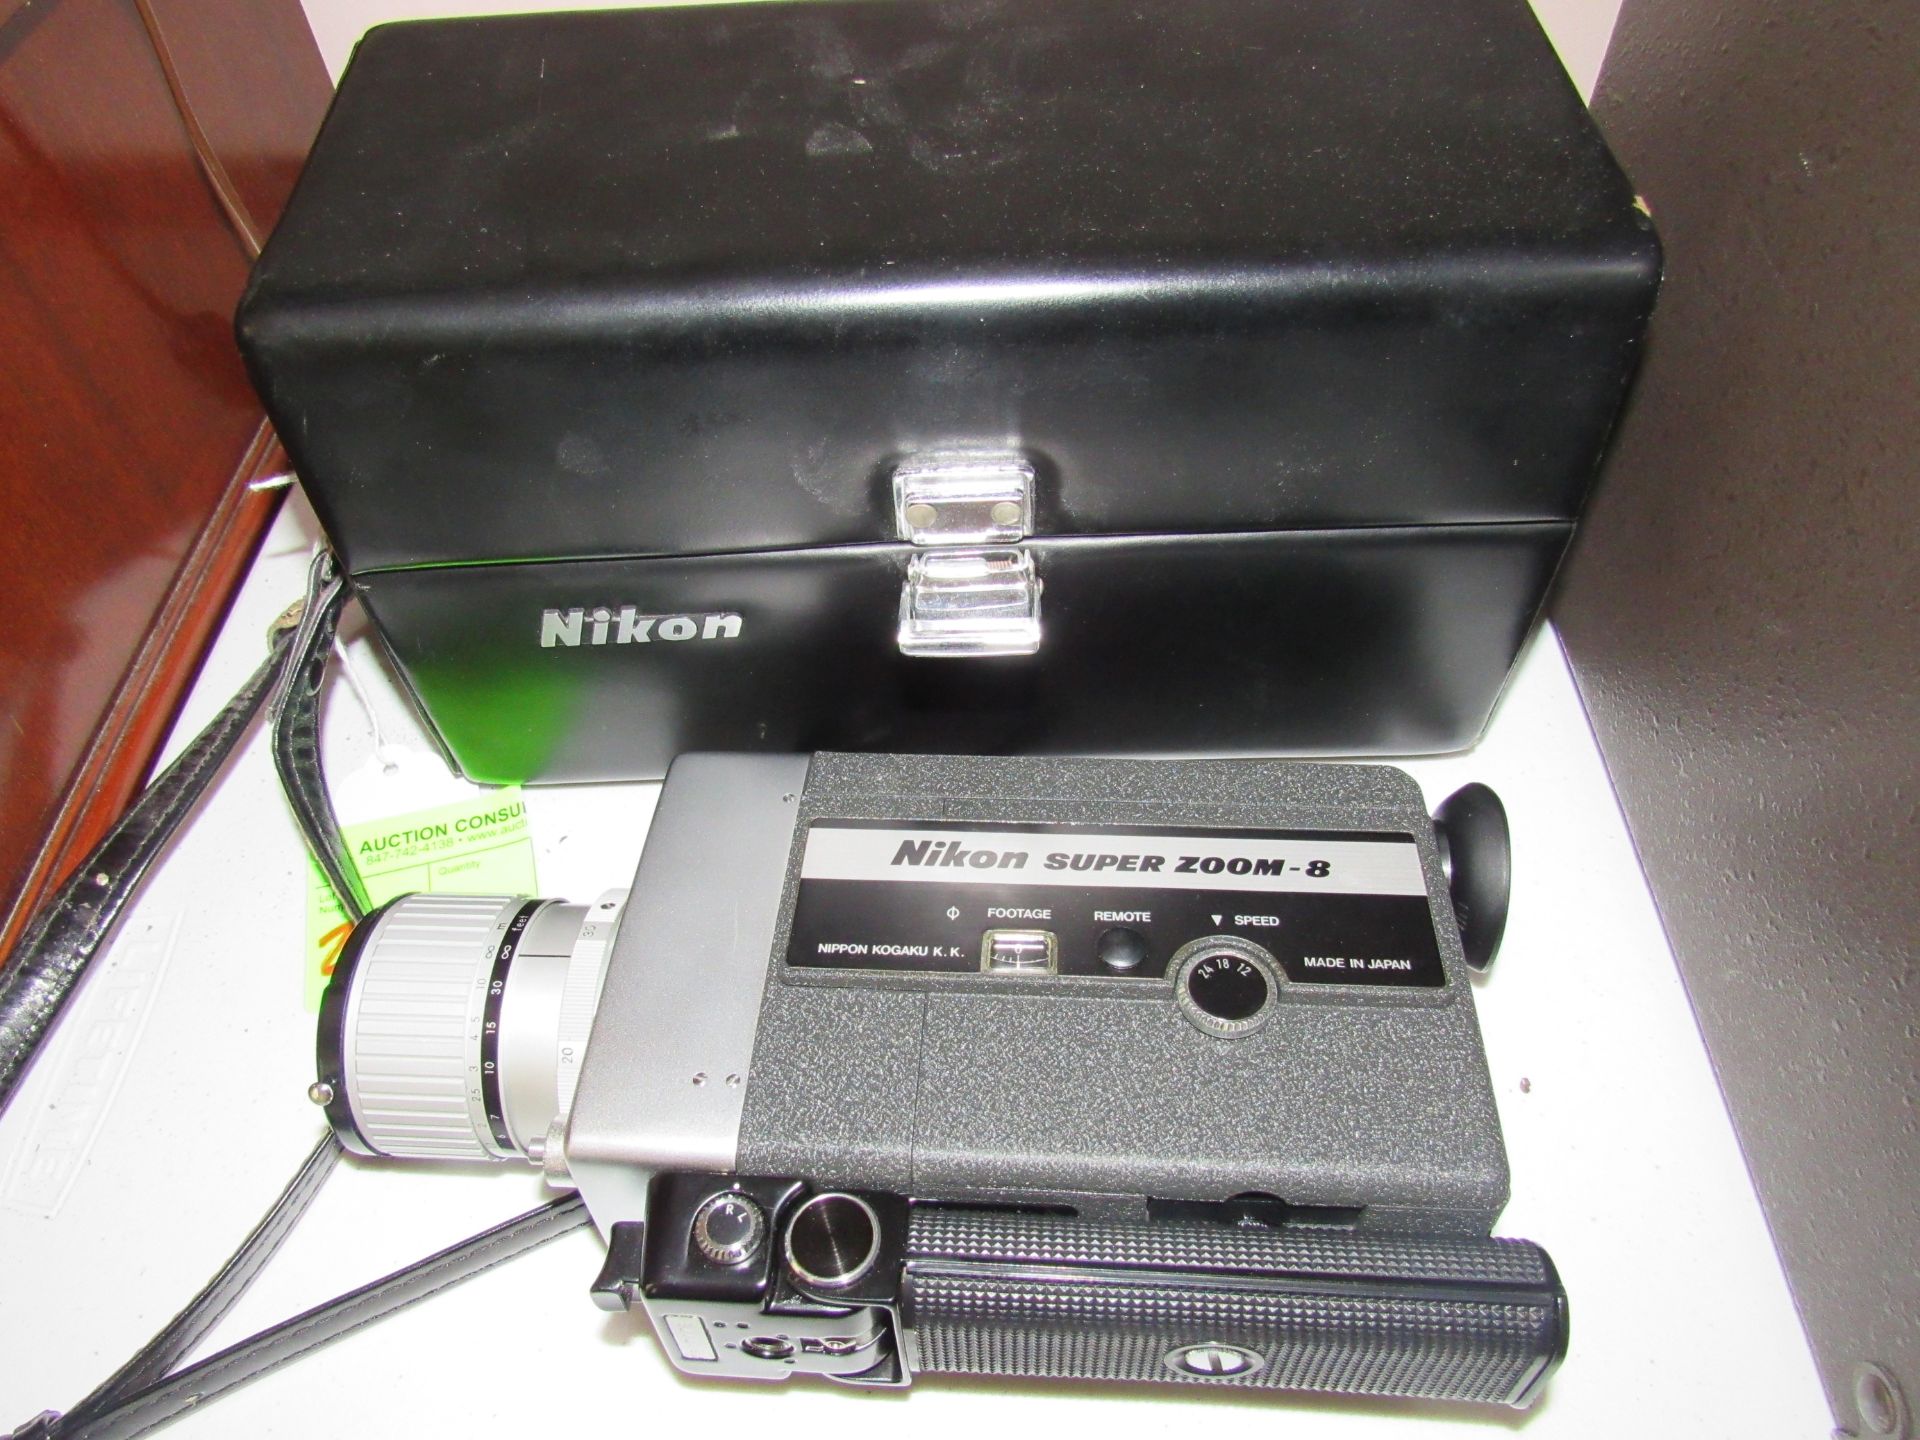 Nikon Super Zoom 8 with travel case